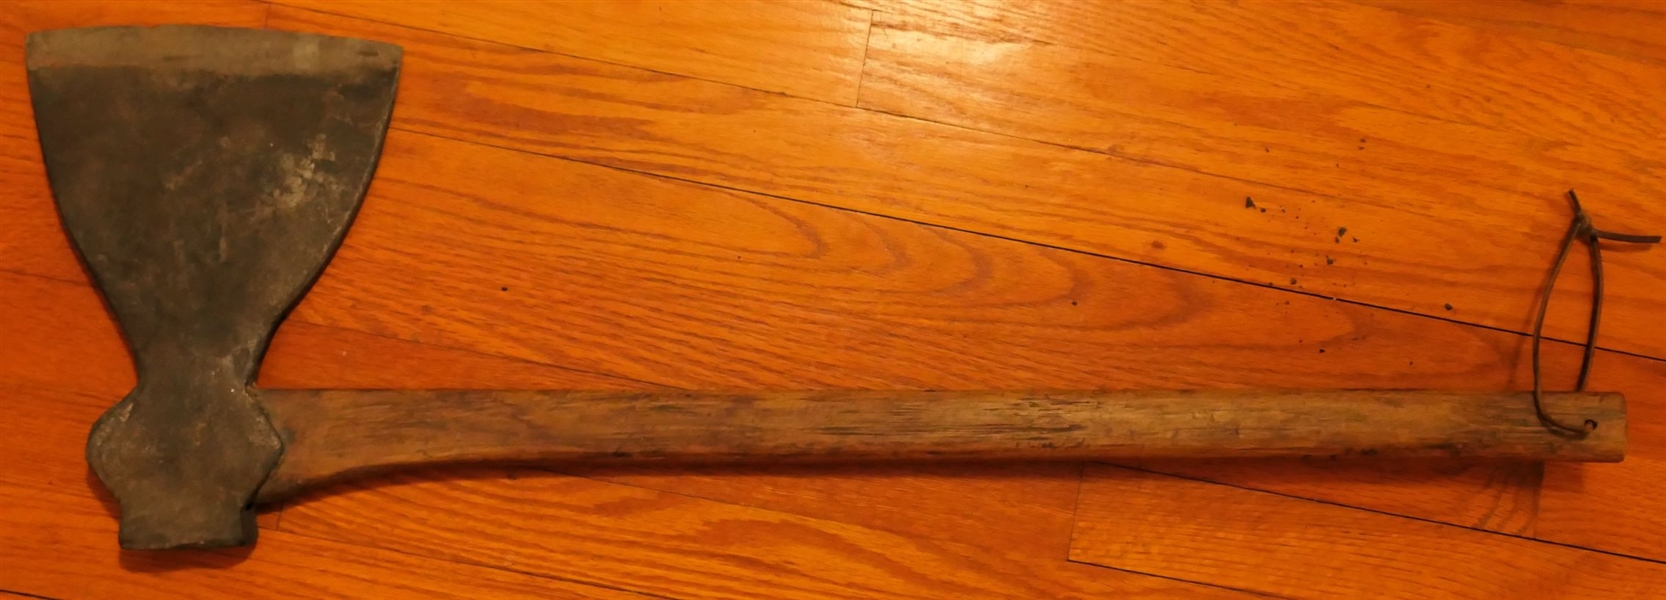 Broad - Hewing Axe with Wood Handle - Axe Head Measures 8" by 11 1/2" 